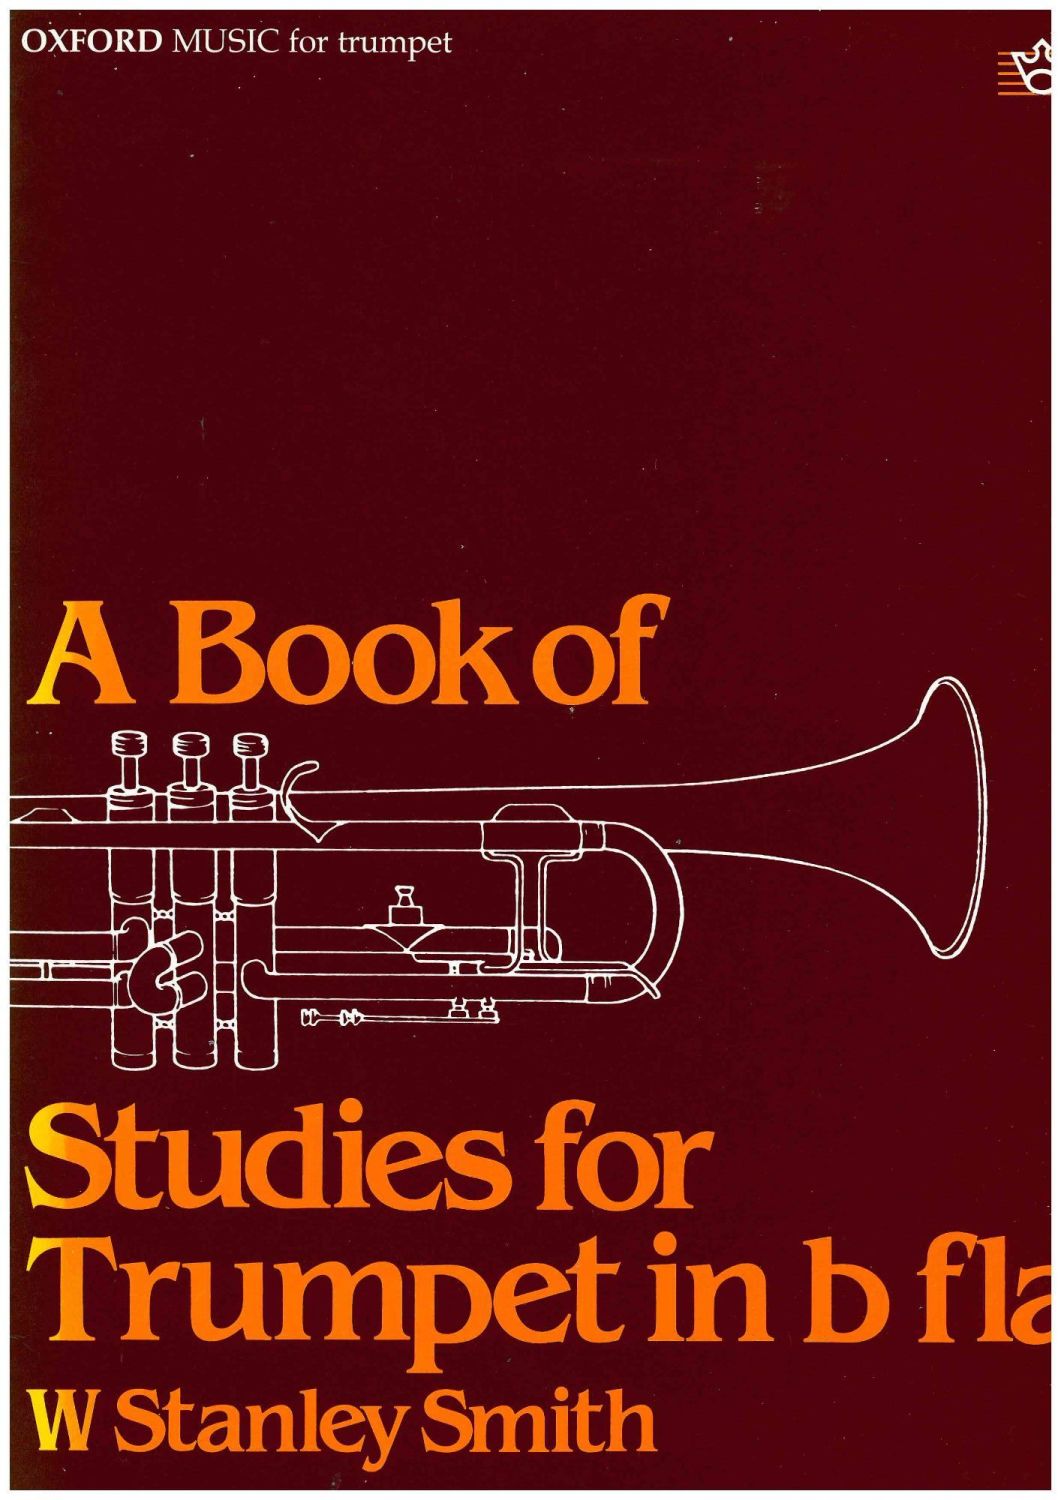 A Book of Studies for Trumpet in Bb